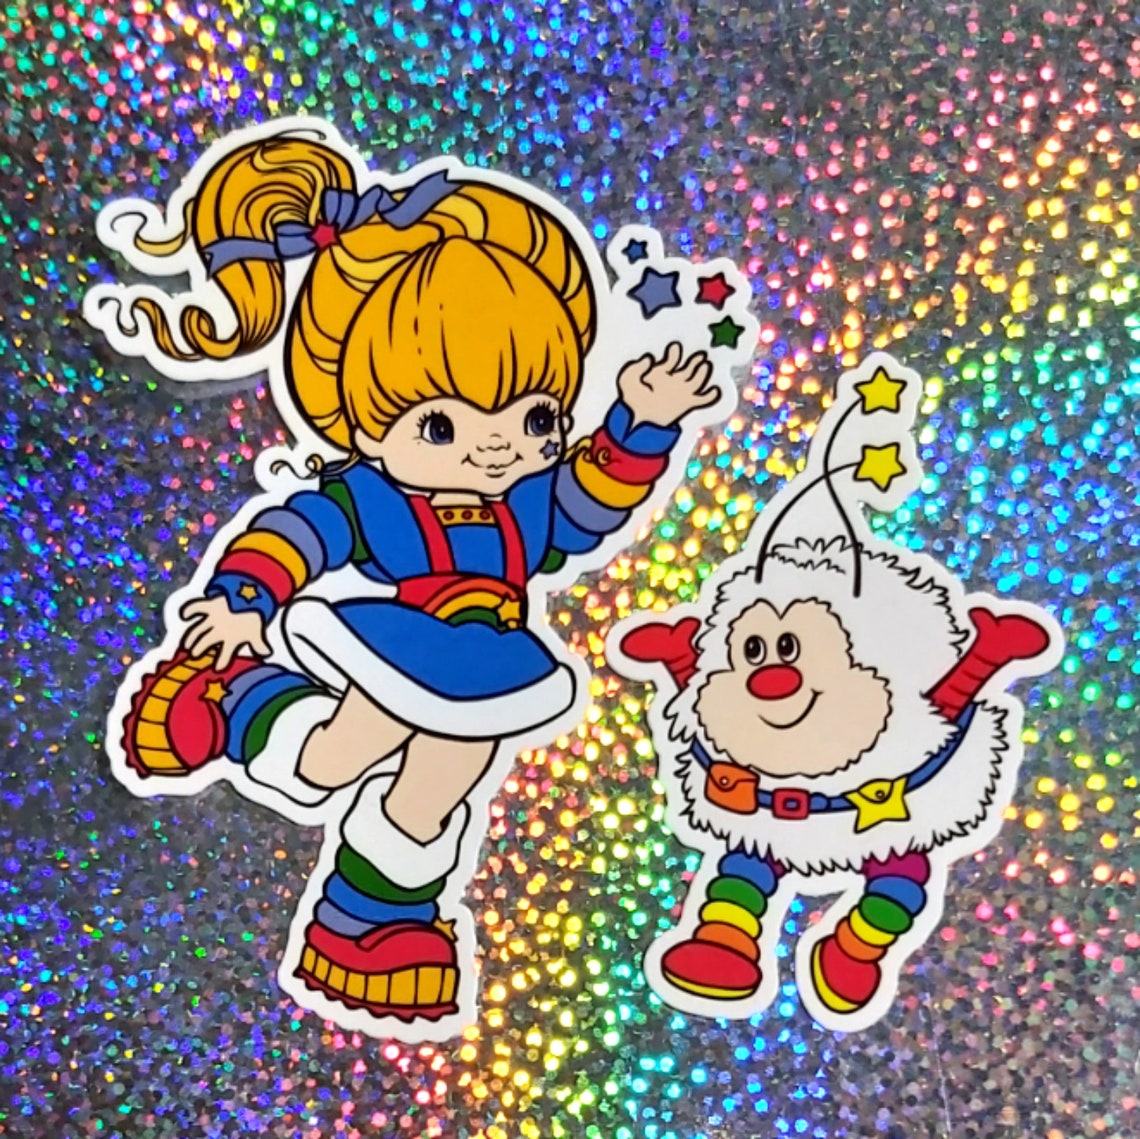 Vintage inspired 1980s Rainbow Brite and Twink the sprite set | Etsy